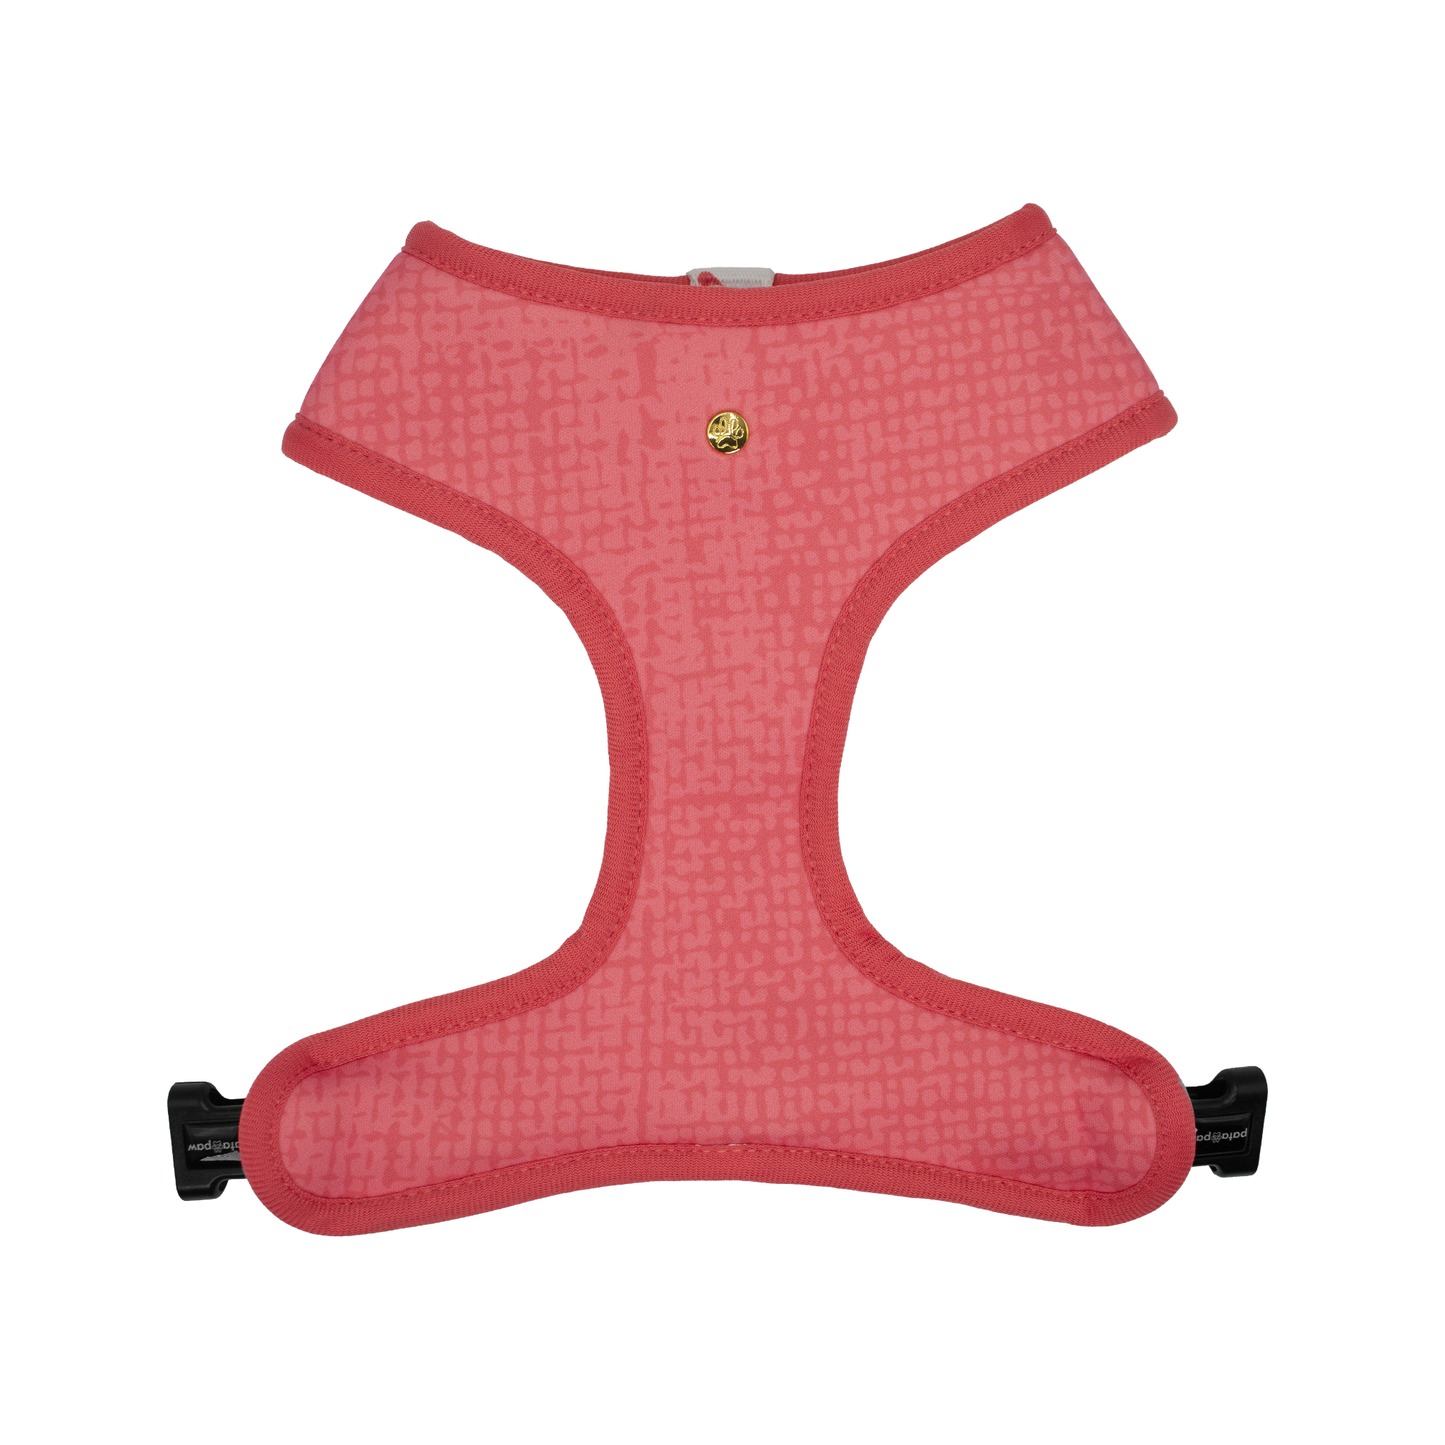 Pata Paw blush hearts reversible harness showing a timeless and chic texture pattern in blush.